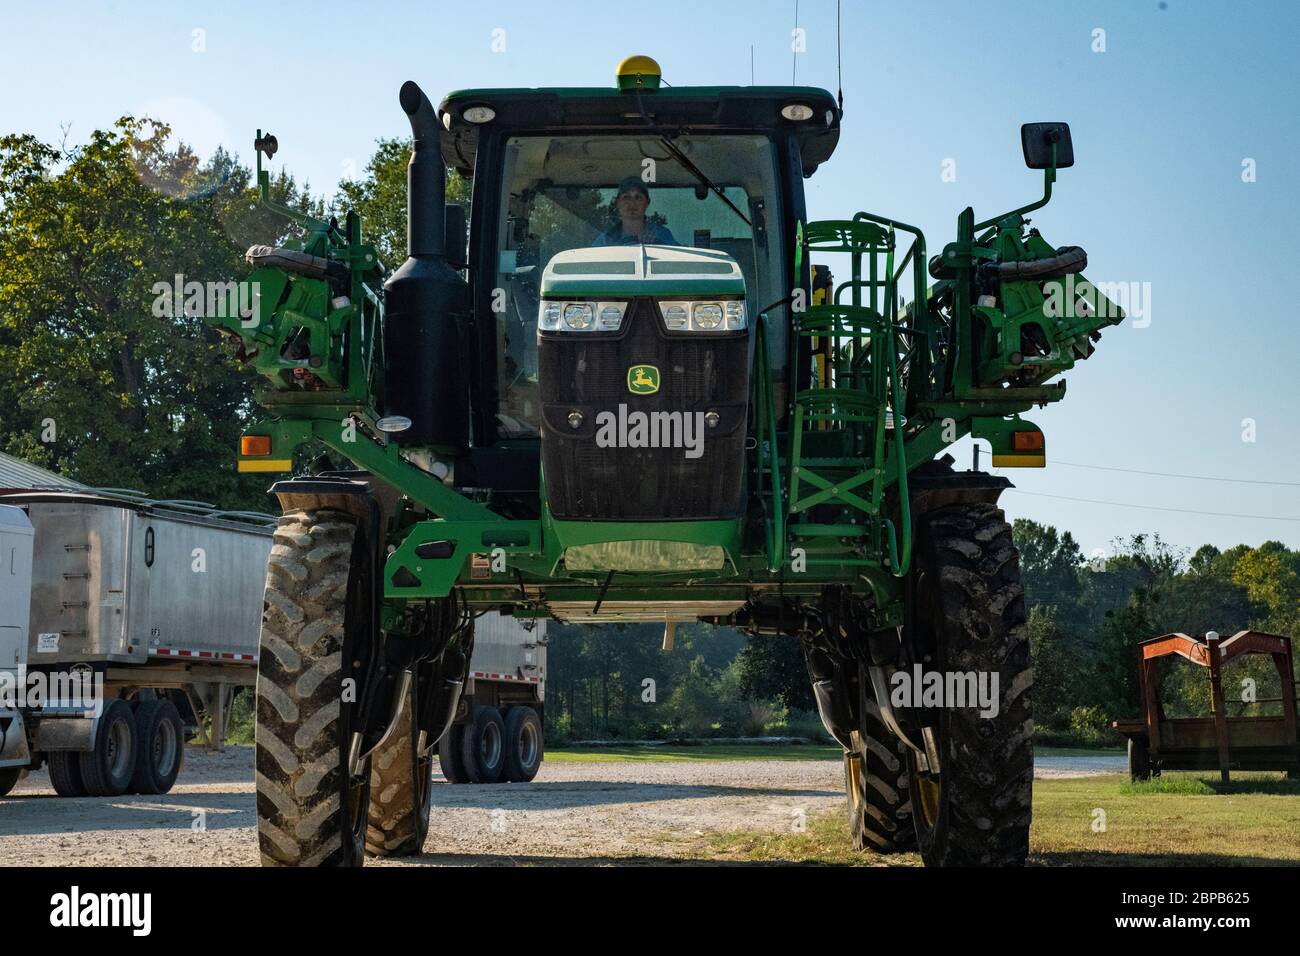 Kim Renfroe-Johnson ween operating a tractor during corn harvest at her family farm September 18, 2019 in Carroll County, Tennessee. The farm utilizes conservation practices developed with the USDA to balance land stewardship and production. Stock Photo